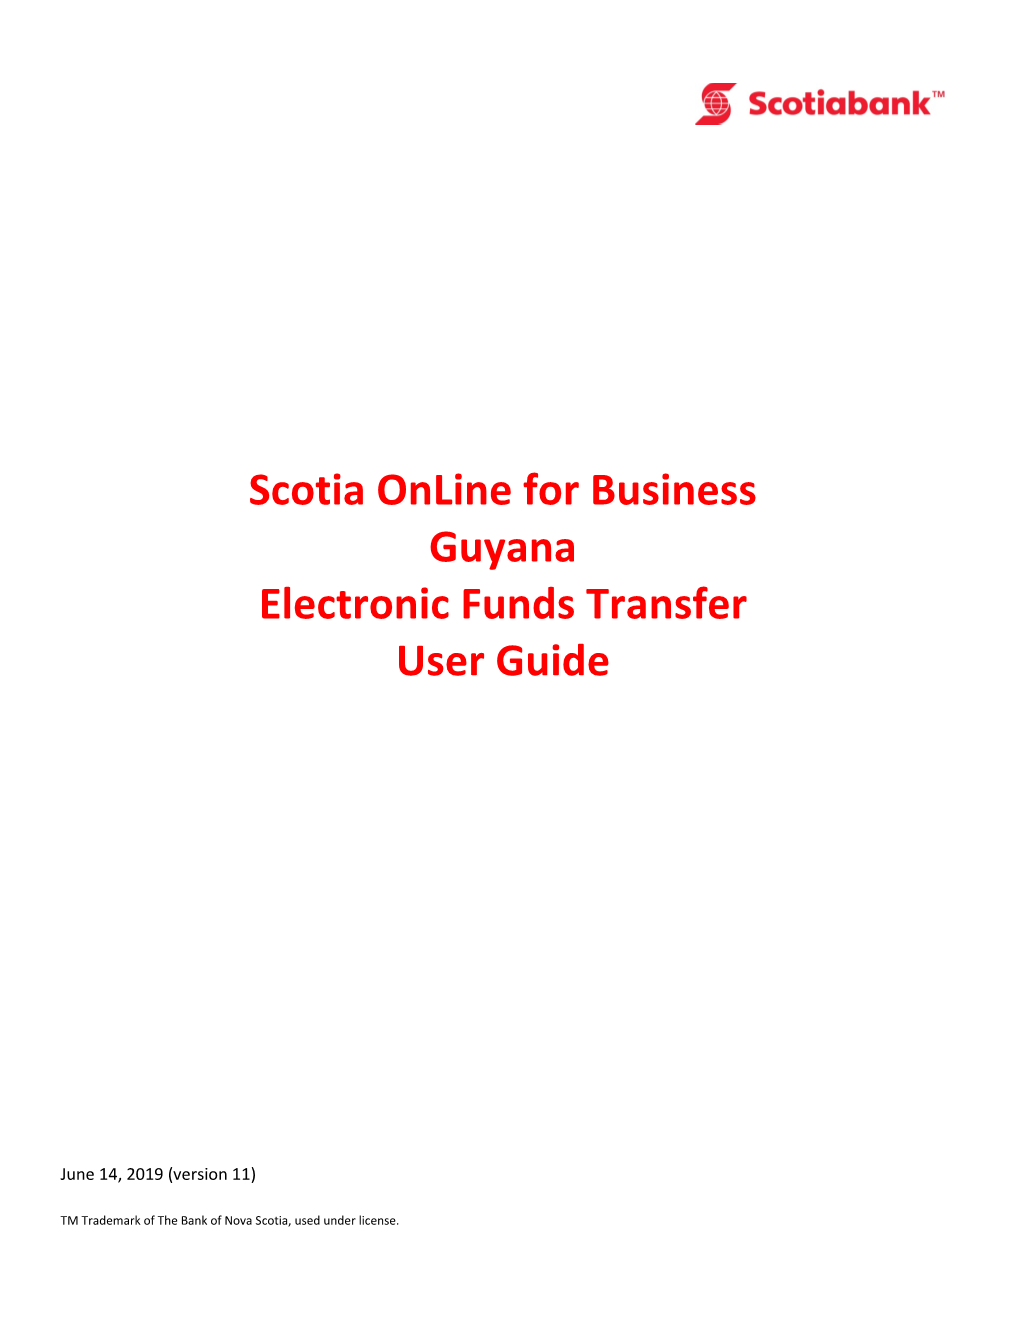 Scotia Online for Business Guyana Electronic Funds Transfer User Guide